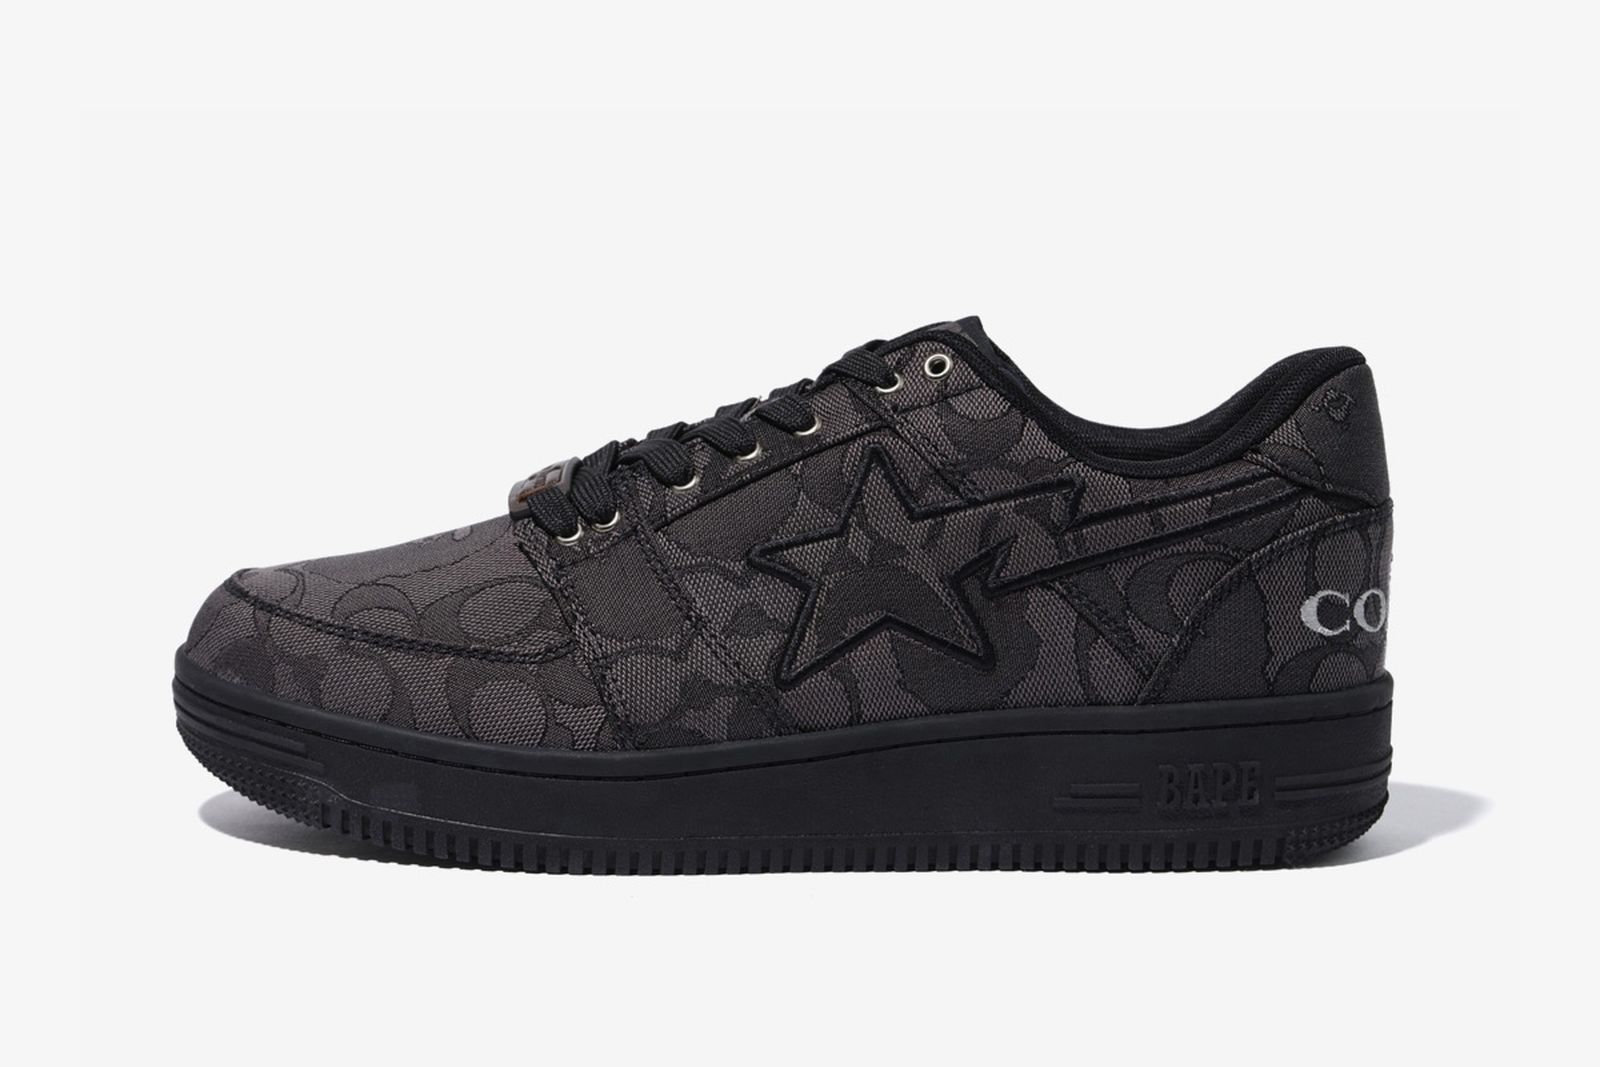 Coach x A Bathing Ape BAPE STA: Release Info and Official Images